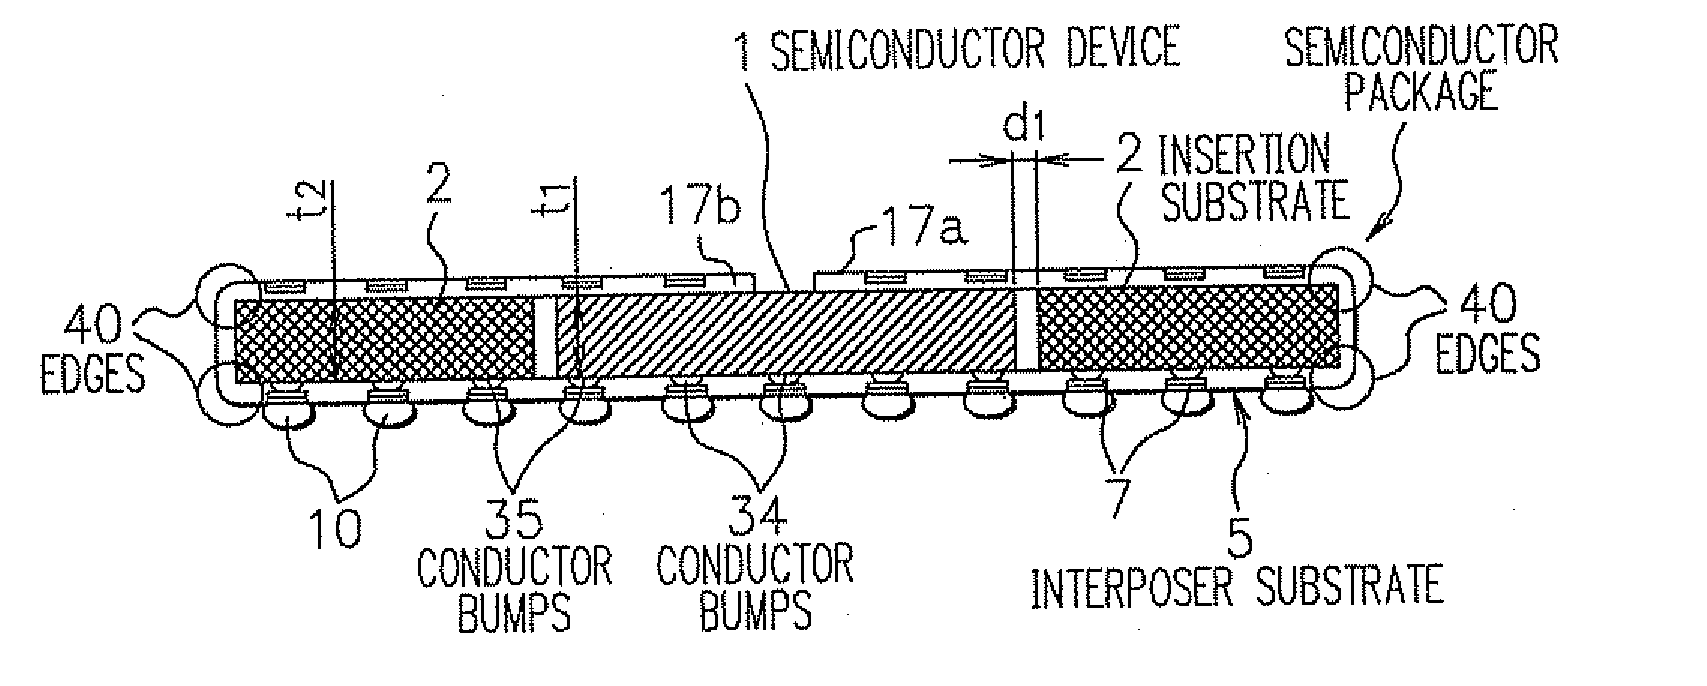 Electronic device package, module, and electronic device